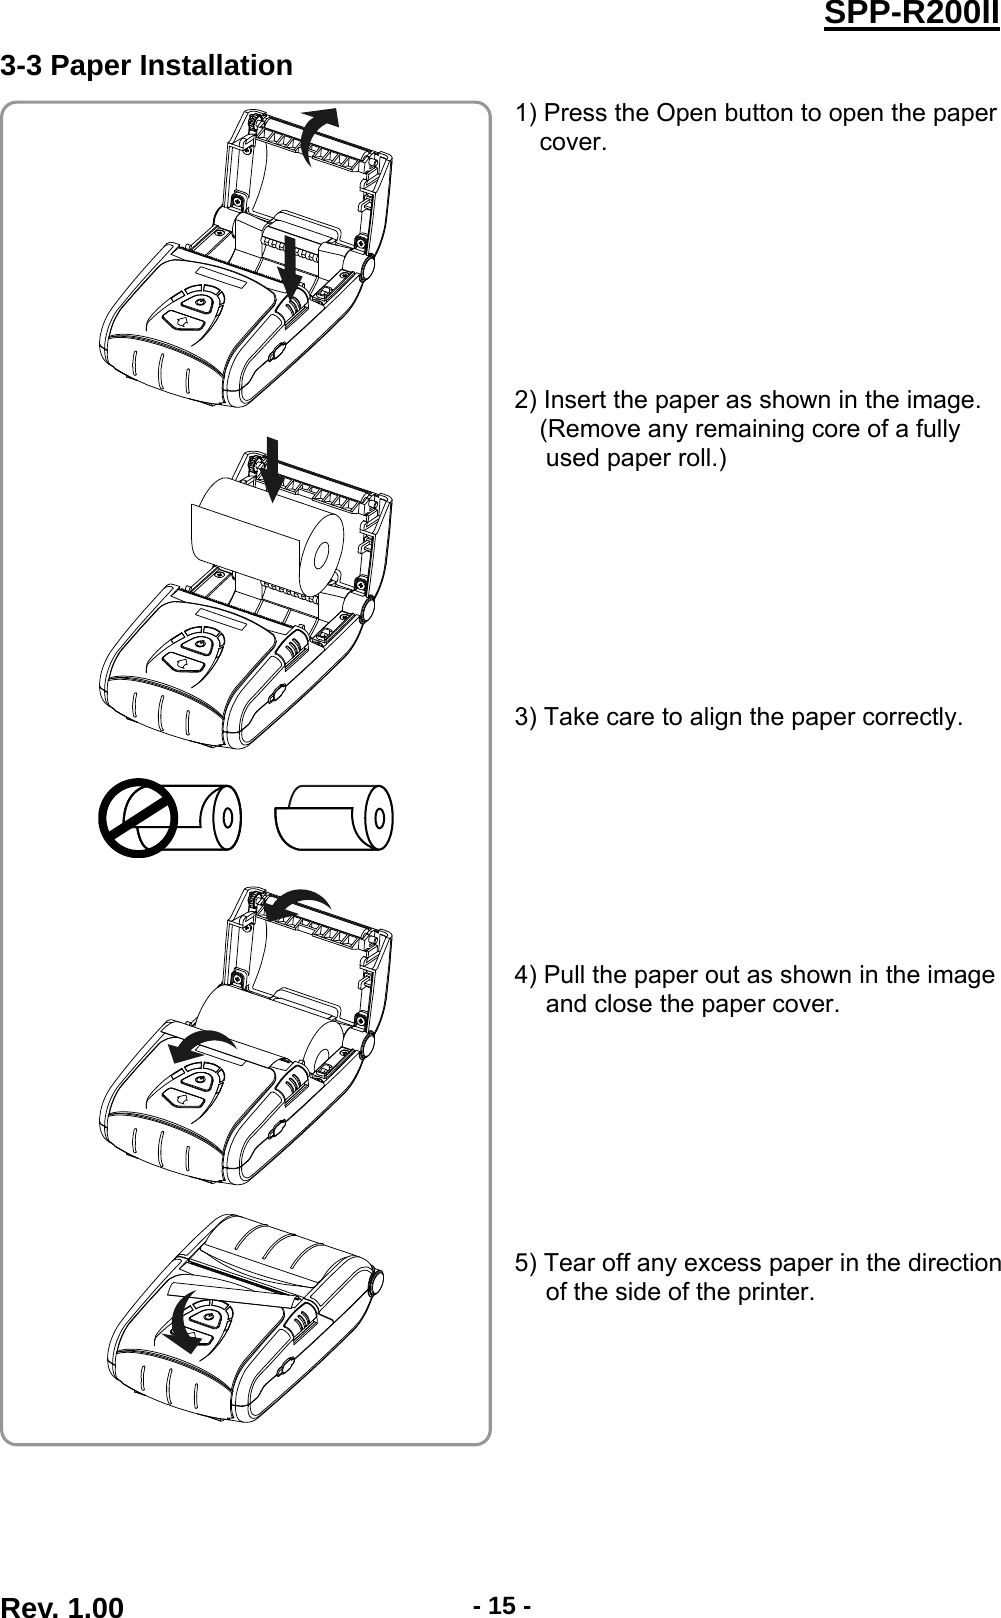  Rev. 1.00  - 15 -SPP-R200II3-3 Paper Installation 1) Press the Open button to open the paper cover.         2) Insert the paper as shown in the image. (Remove any remaining core of a fully used paper roll.)         3) Take care to align the paper correctly.         4) Pull the paper out as shown in the image and close the paper cover.         5) Tear off any excess paper in the direction of the side of the printer.          